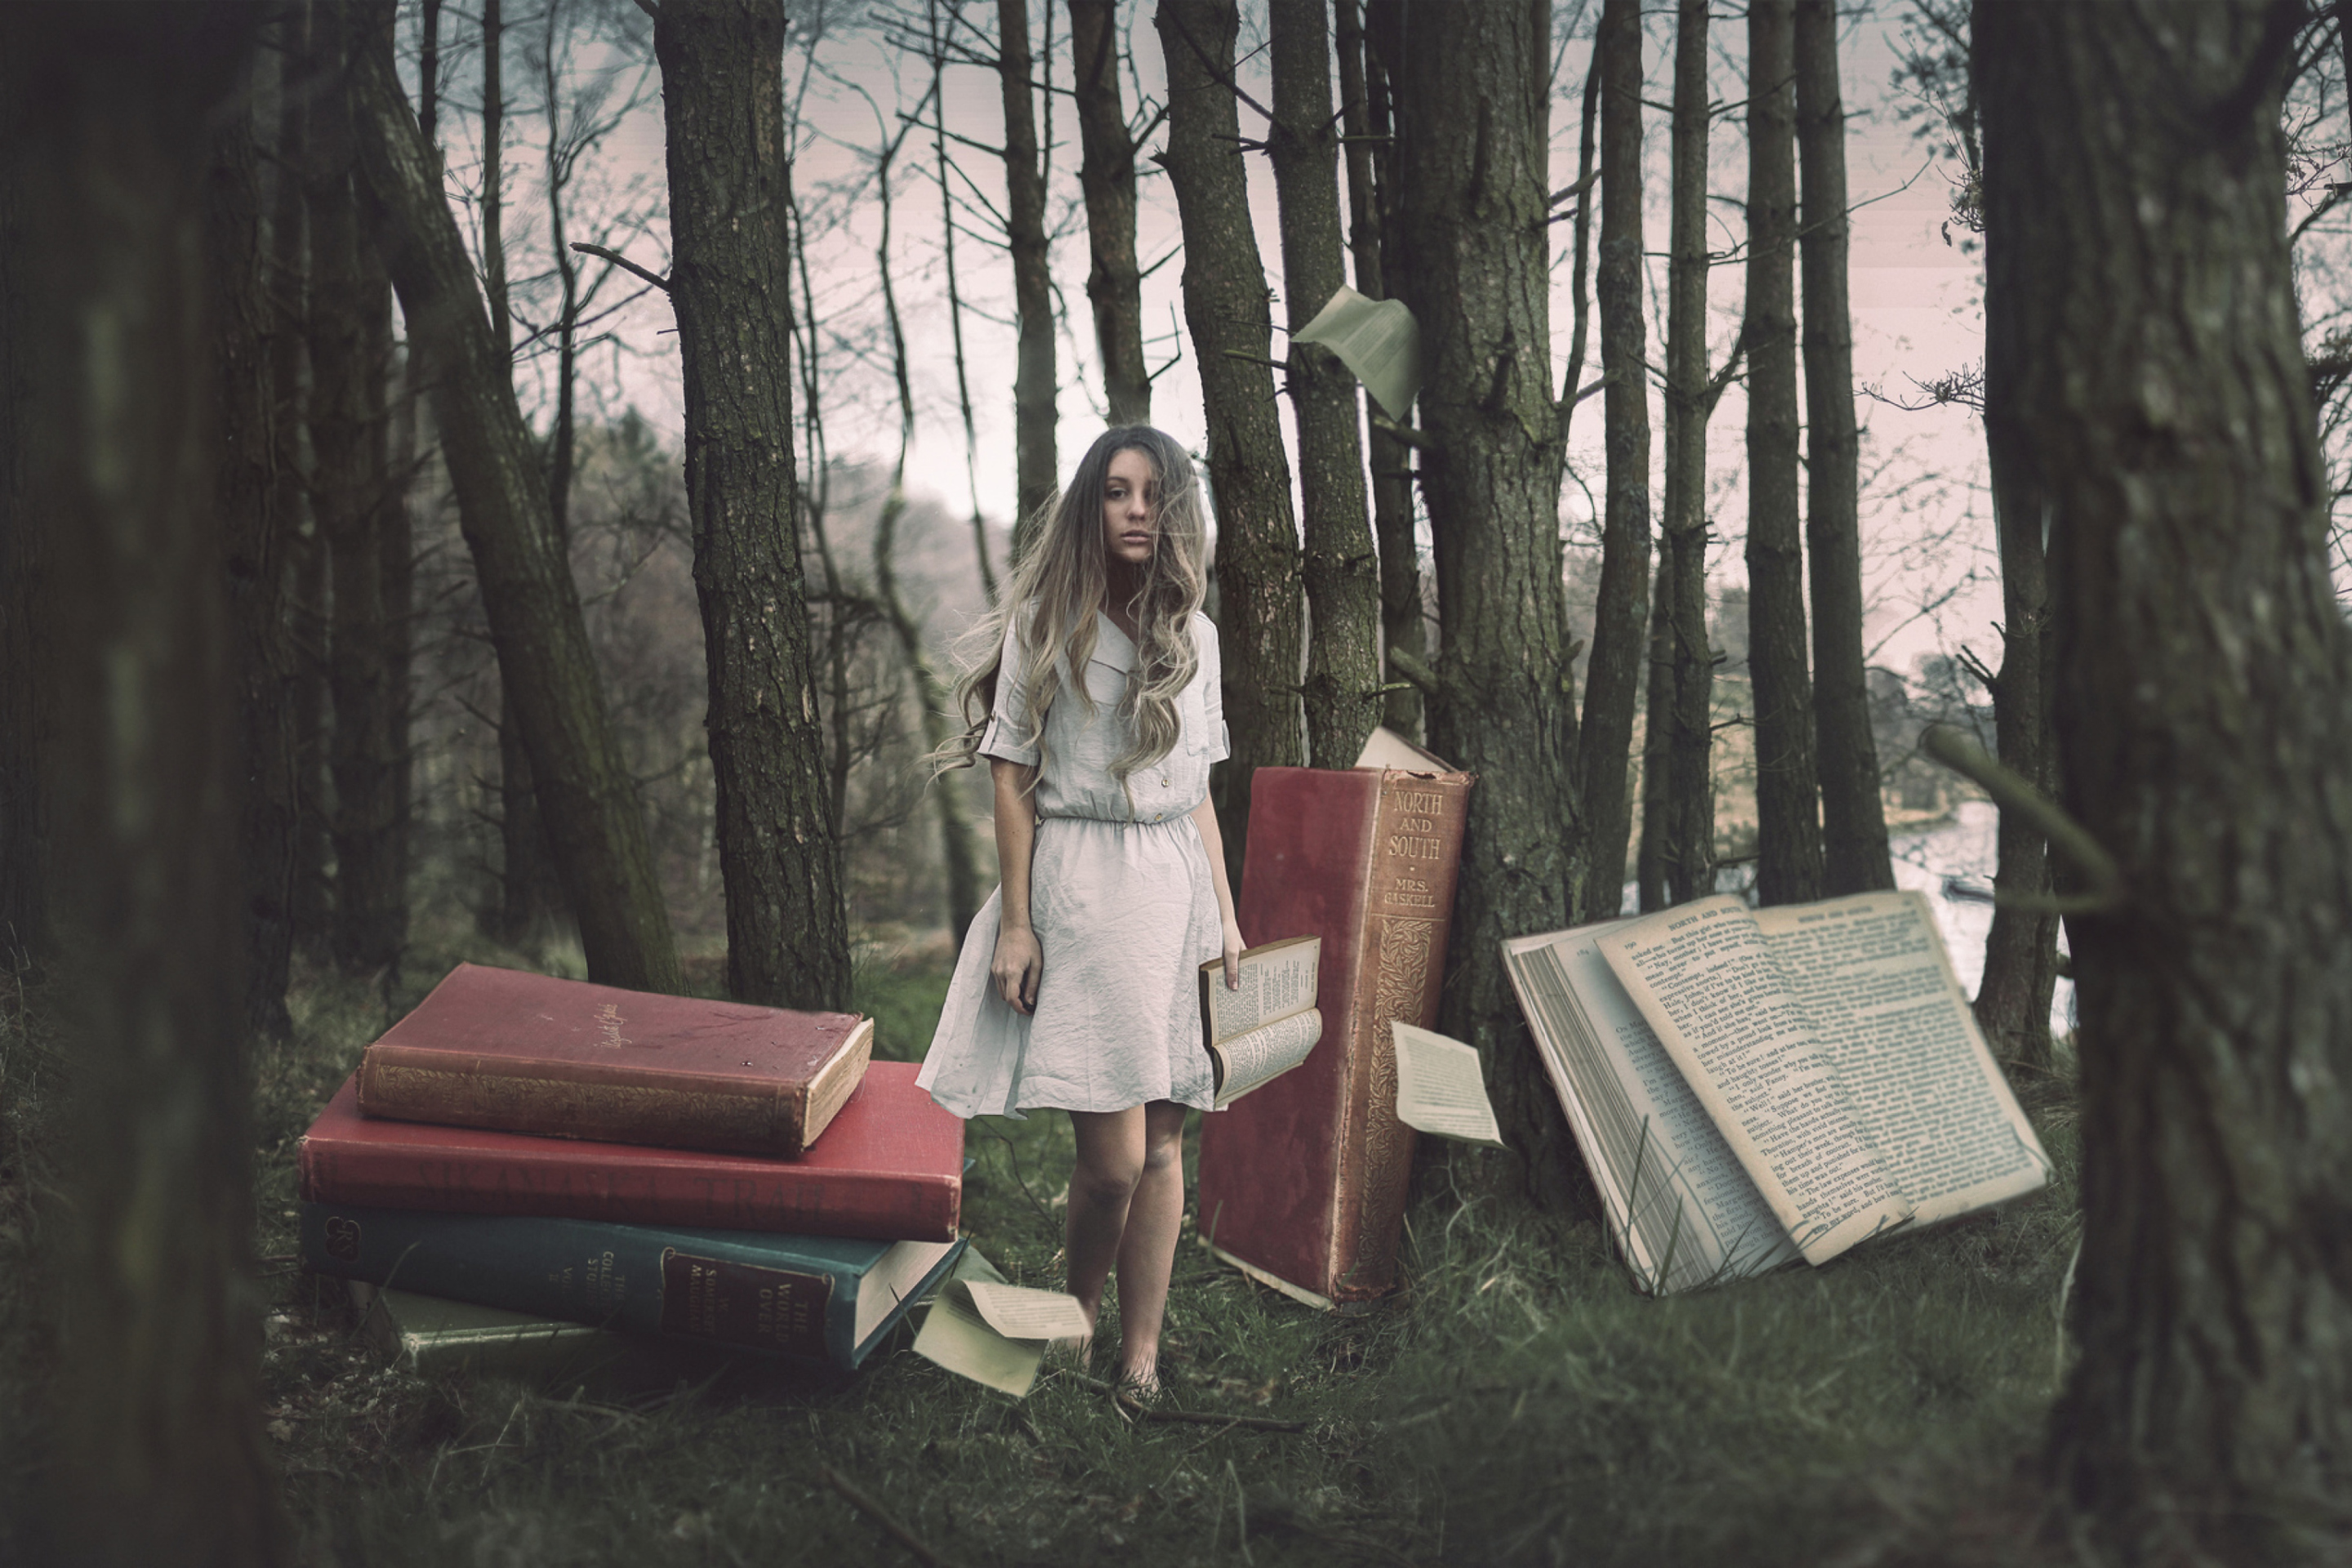 Das Forest Nymph Surrounded By Books Wallpaper 2880x1920